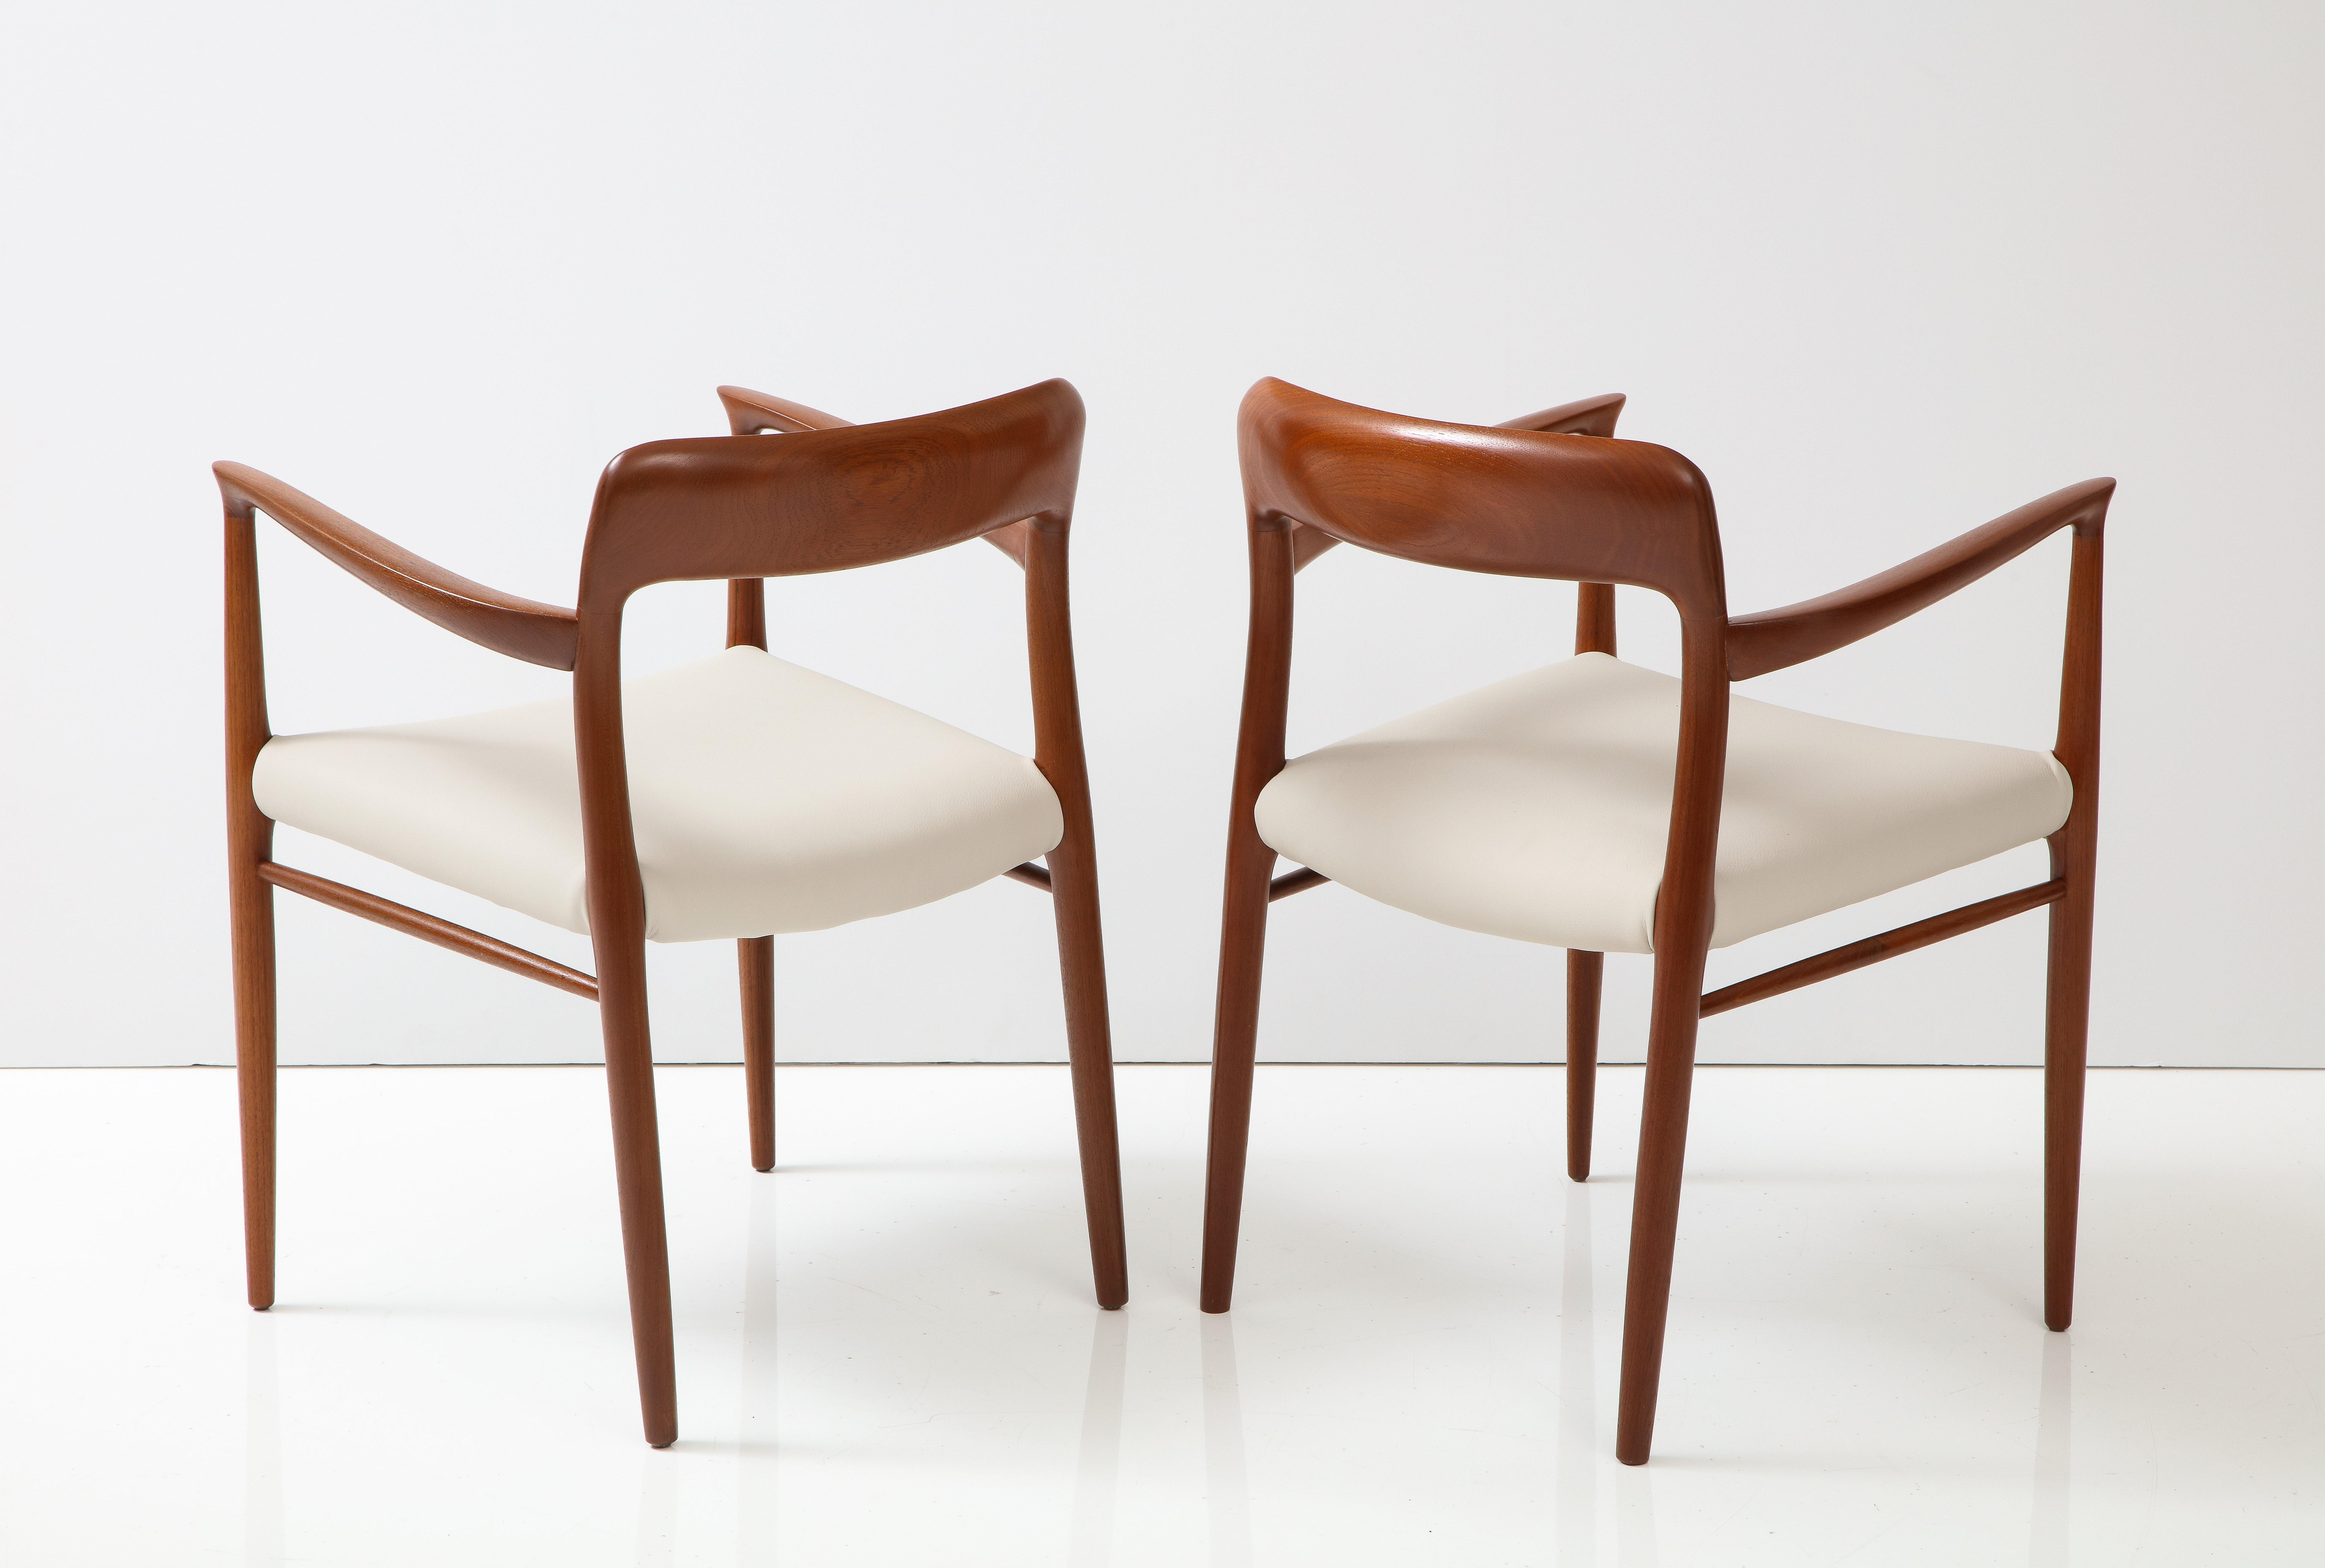 1950's mid-century modern Danish teak and leather dining/side chairs designed by Niels Otto Moller model #56, fully restored and re-upholstered in off white leather, with minor wear and patina due to age and use.